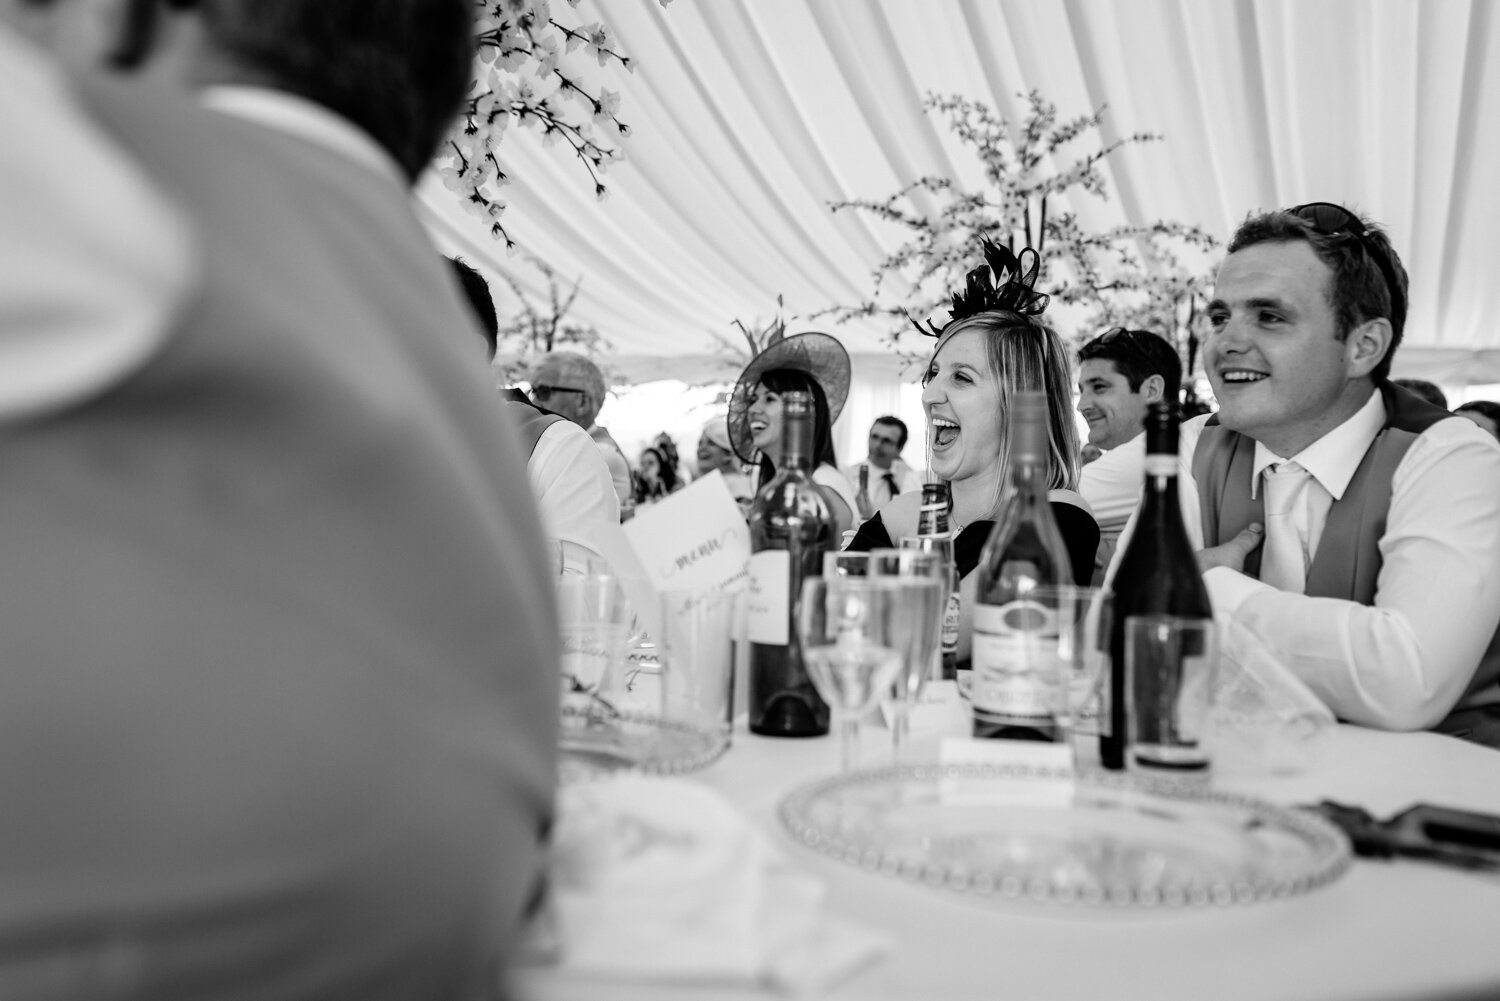 Laughter during wedding speeches